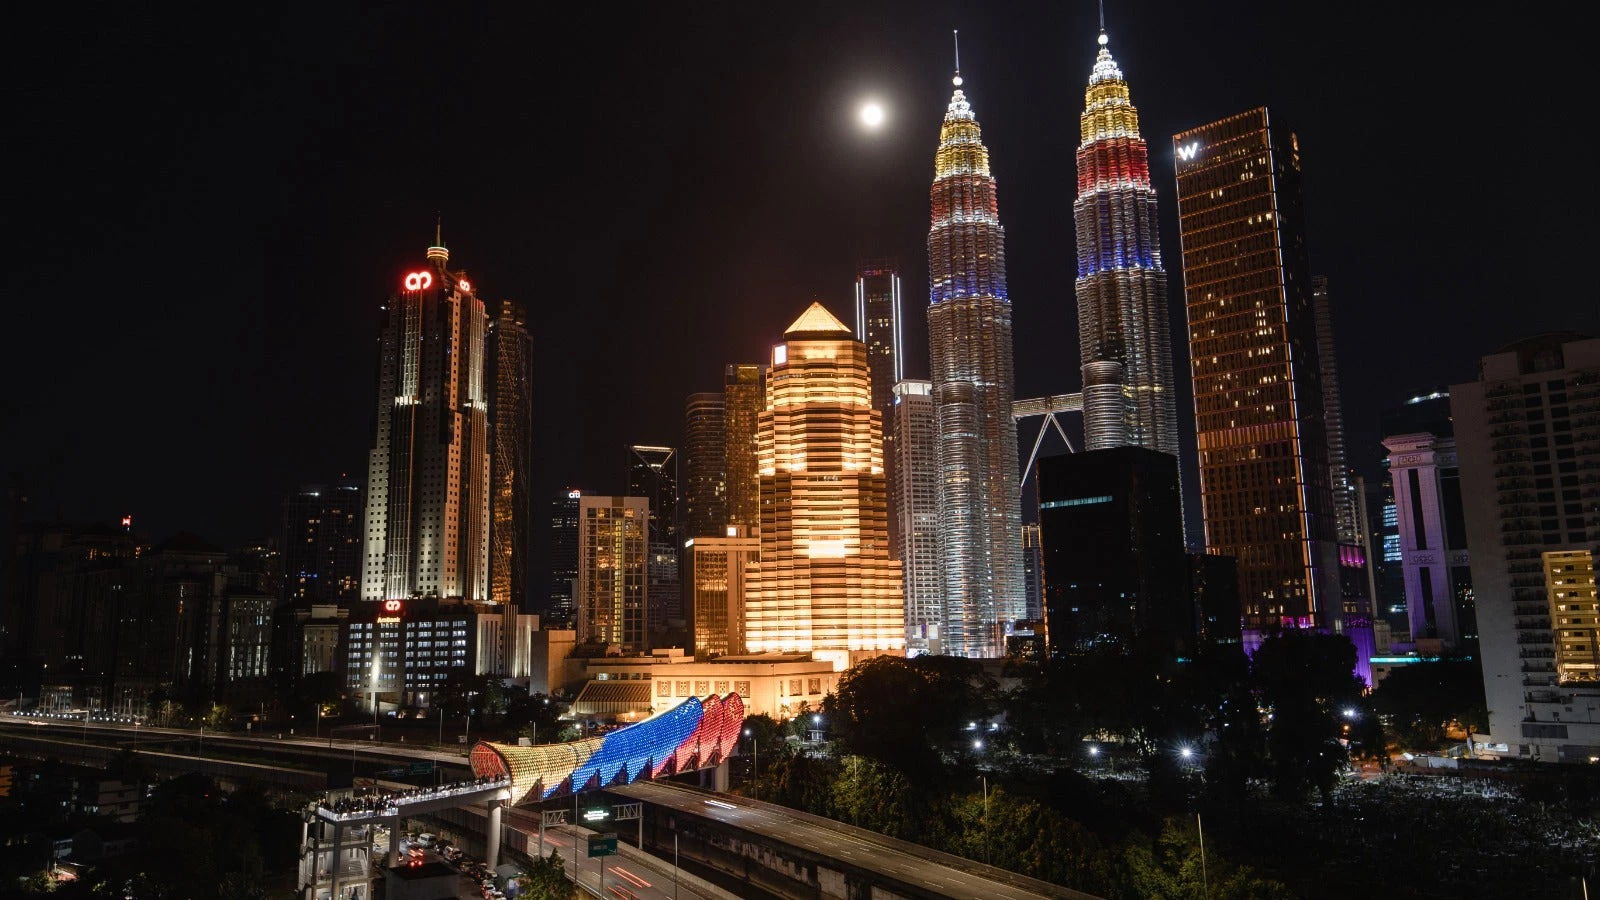 Malaysia has an impressive track record and strong foundations to make the leap into the exclusive club of high-income and developed economies.